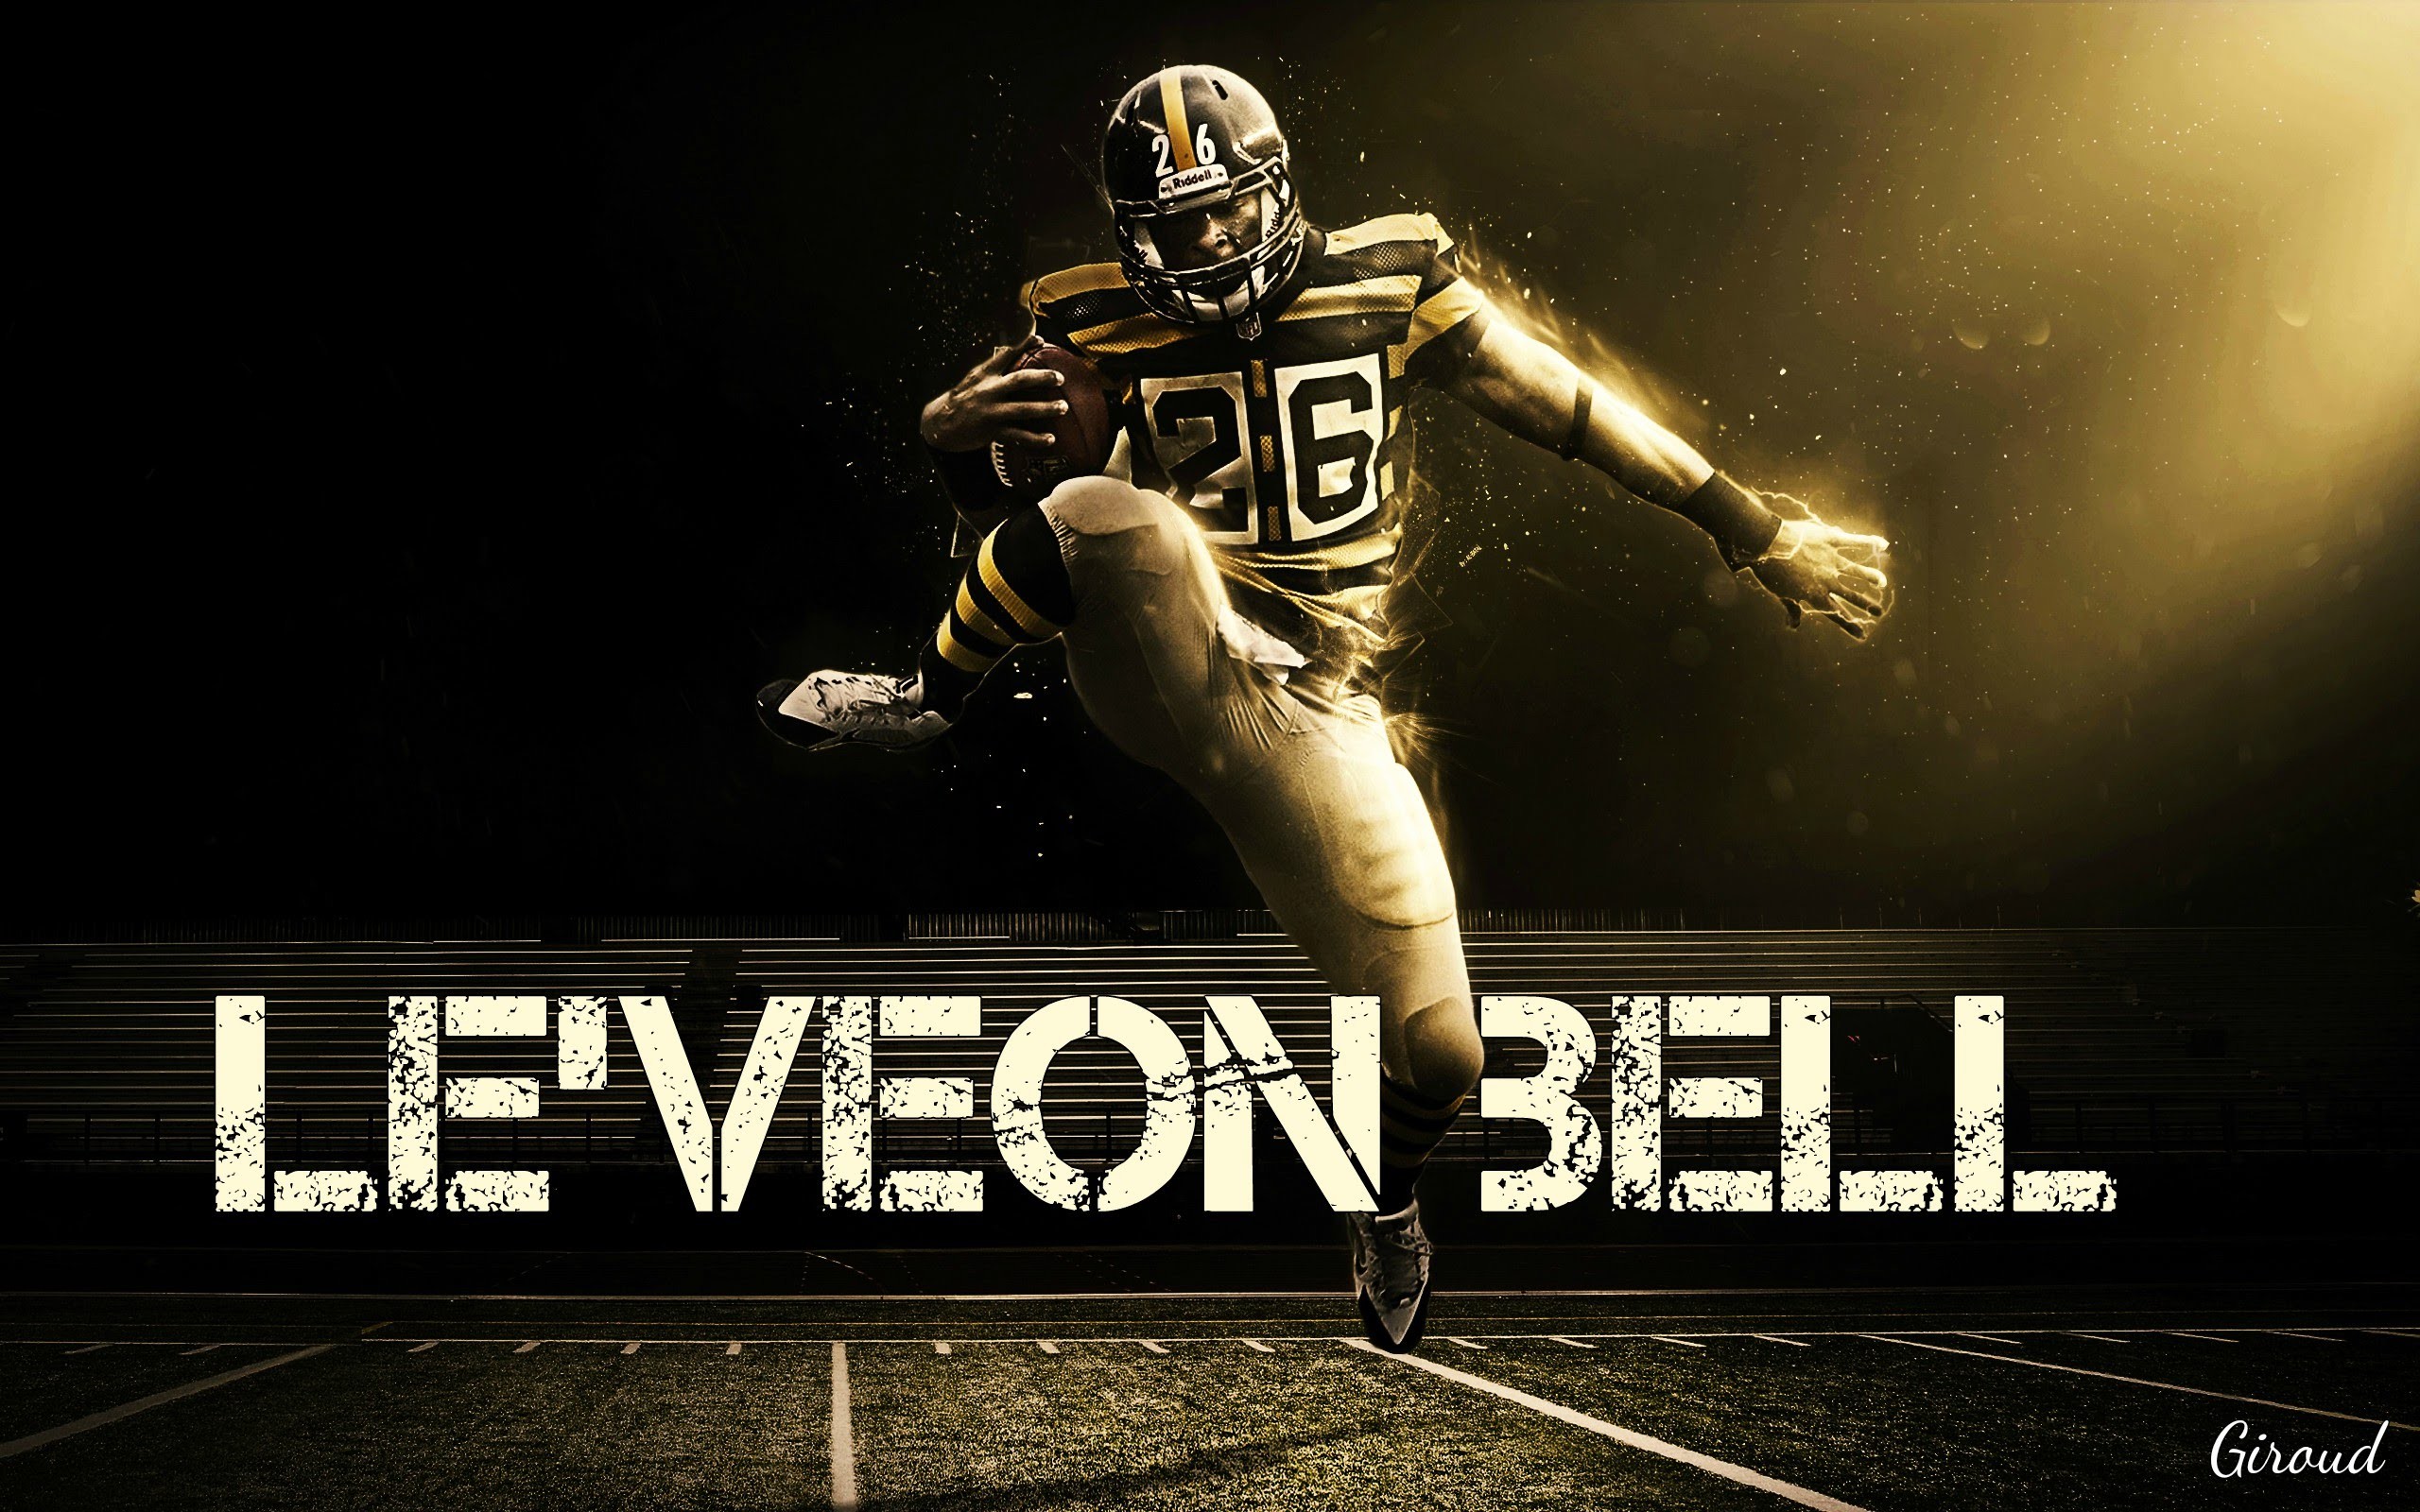 Le'Veon Bell Wallpapers